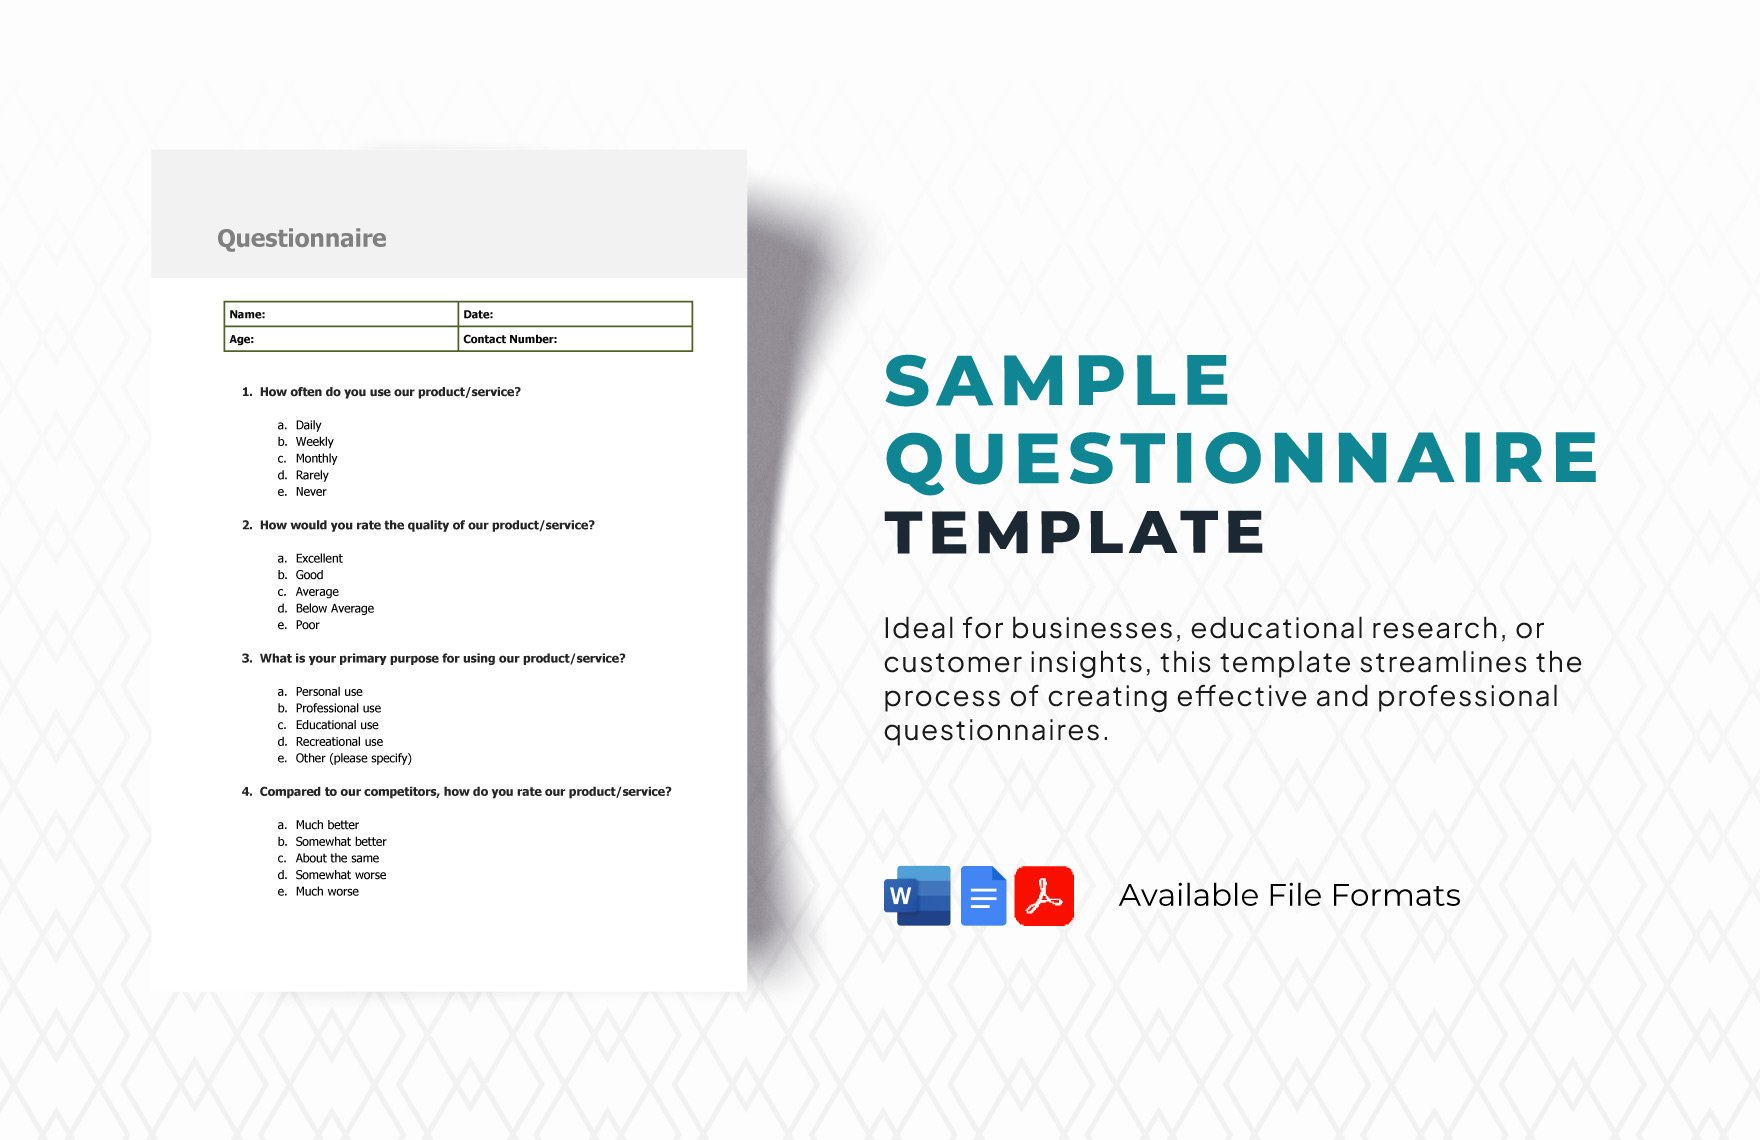 Free Sample Questionnaire Template in Word, Google Docs, PDF